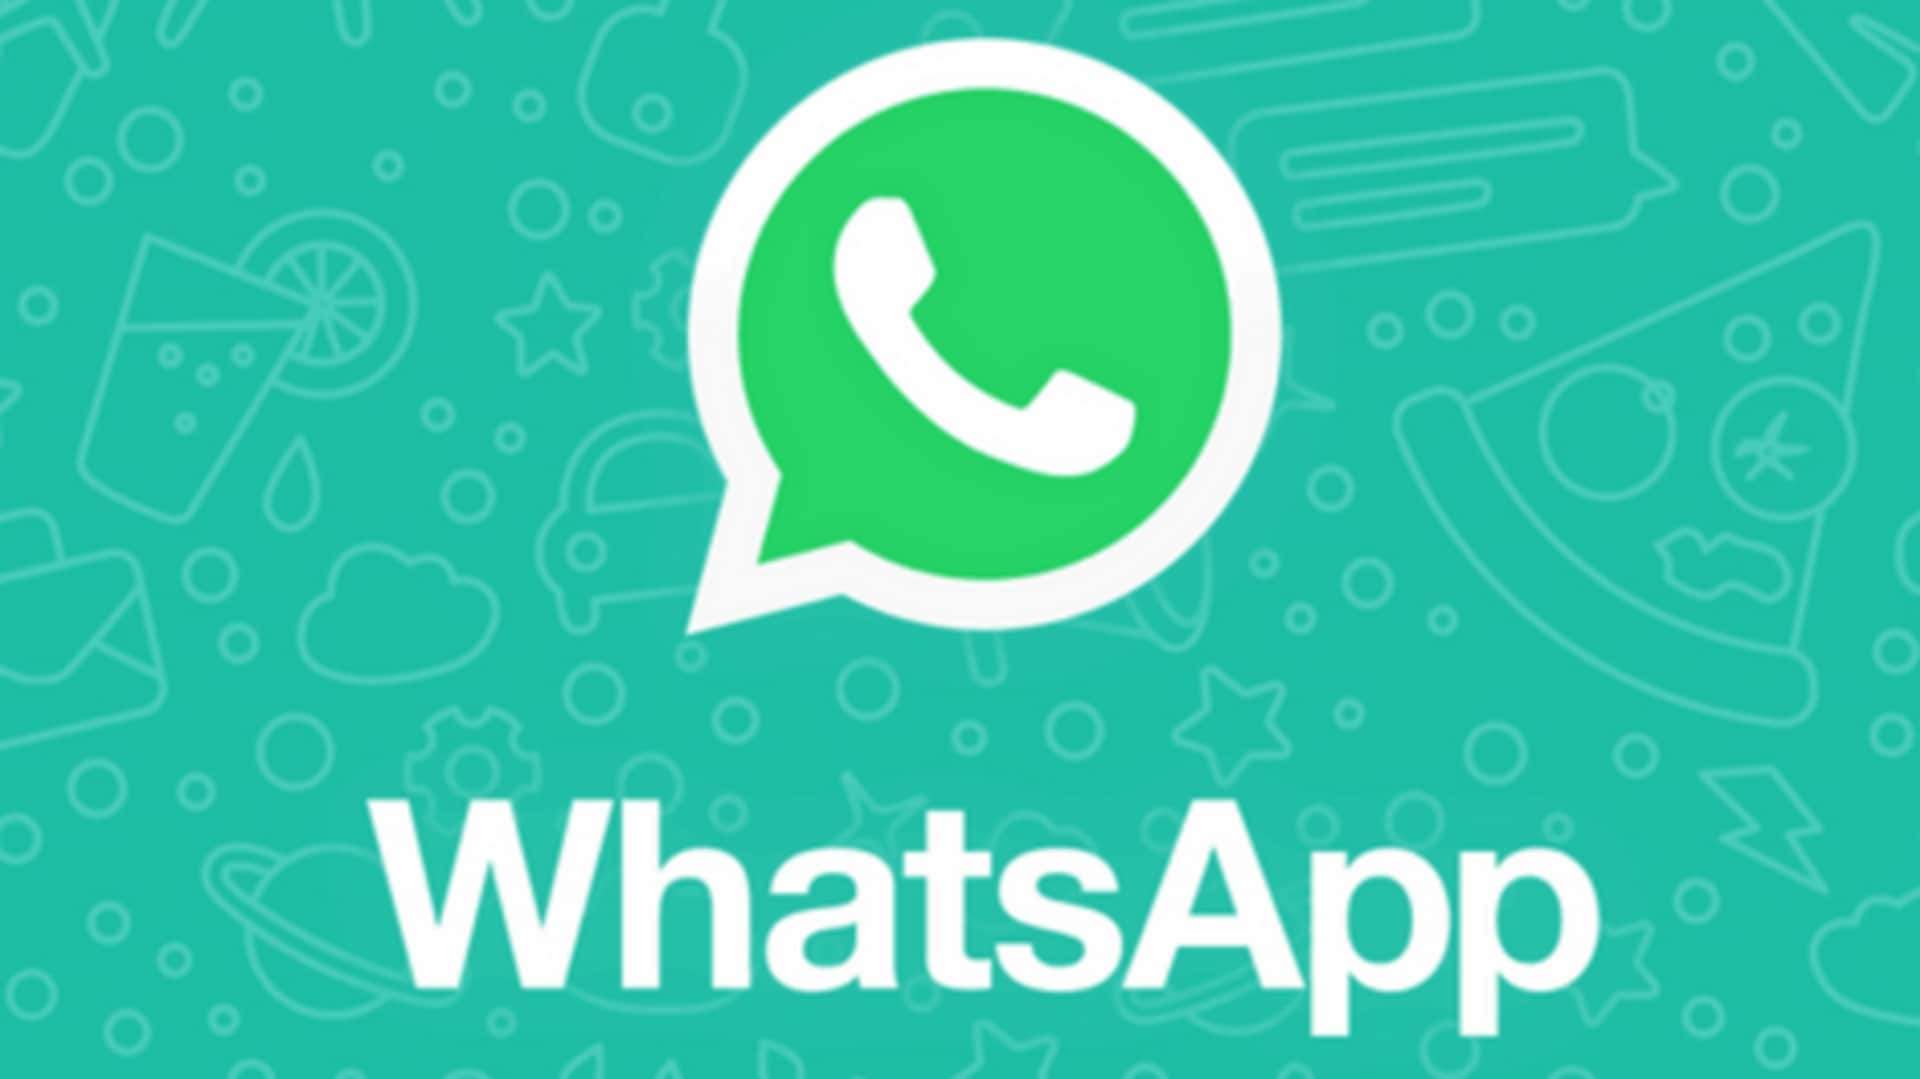 WhatsApp will soon allow you to pin messages within chats